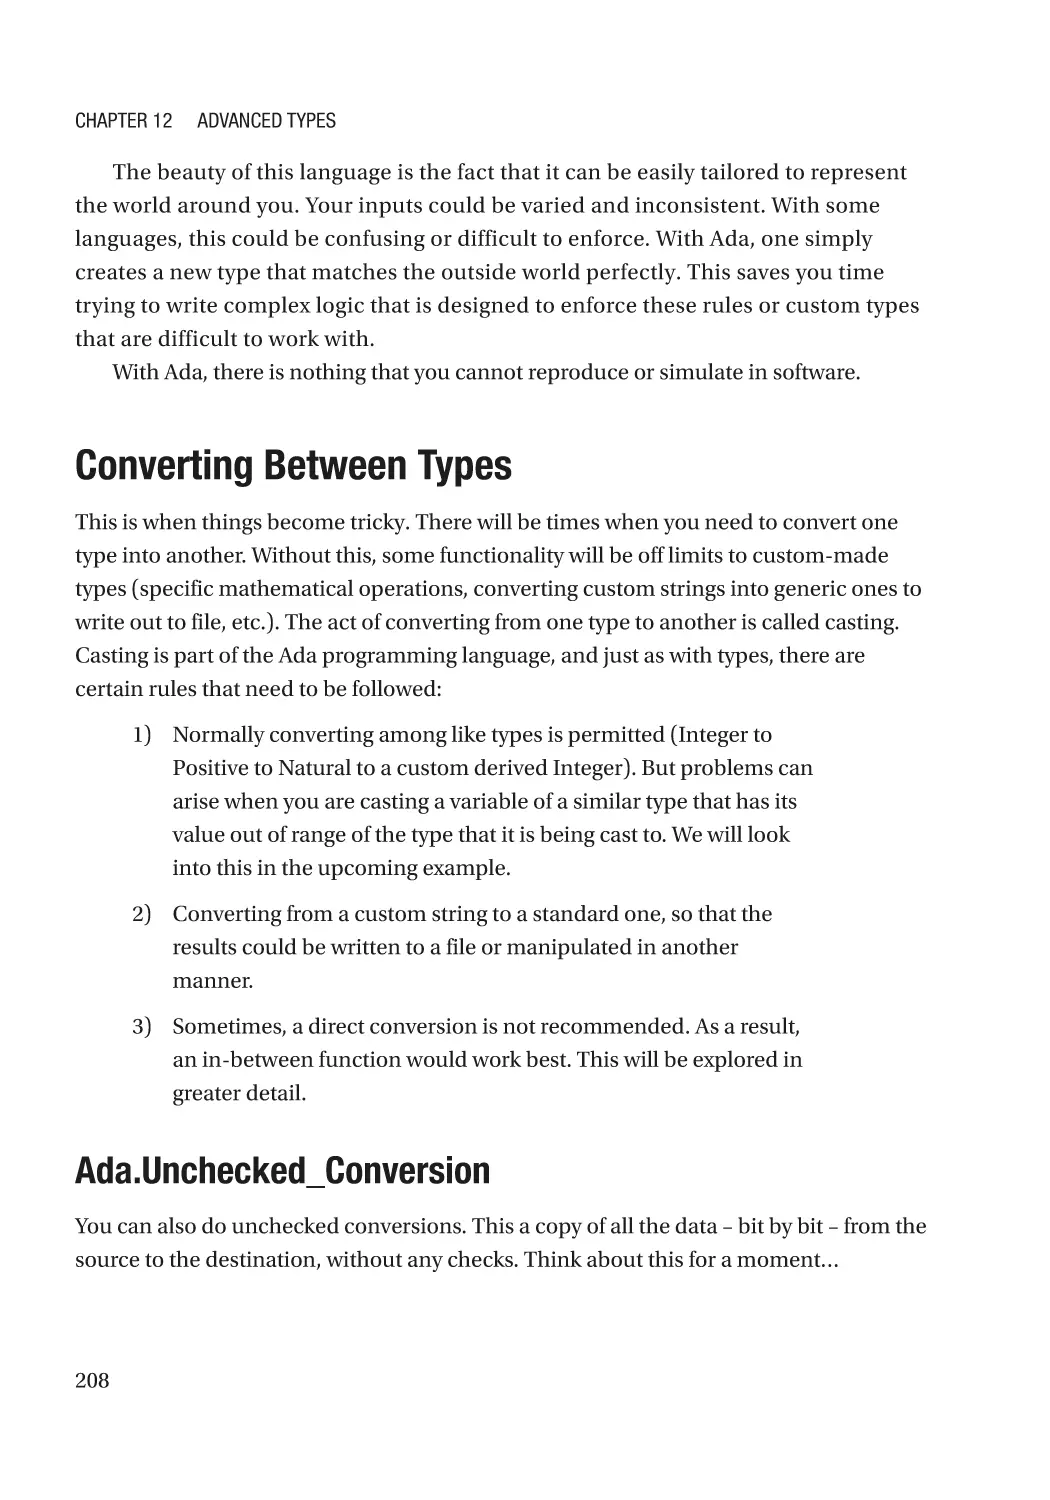 Converting Between Types
Ada.Unchecked_Conversion